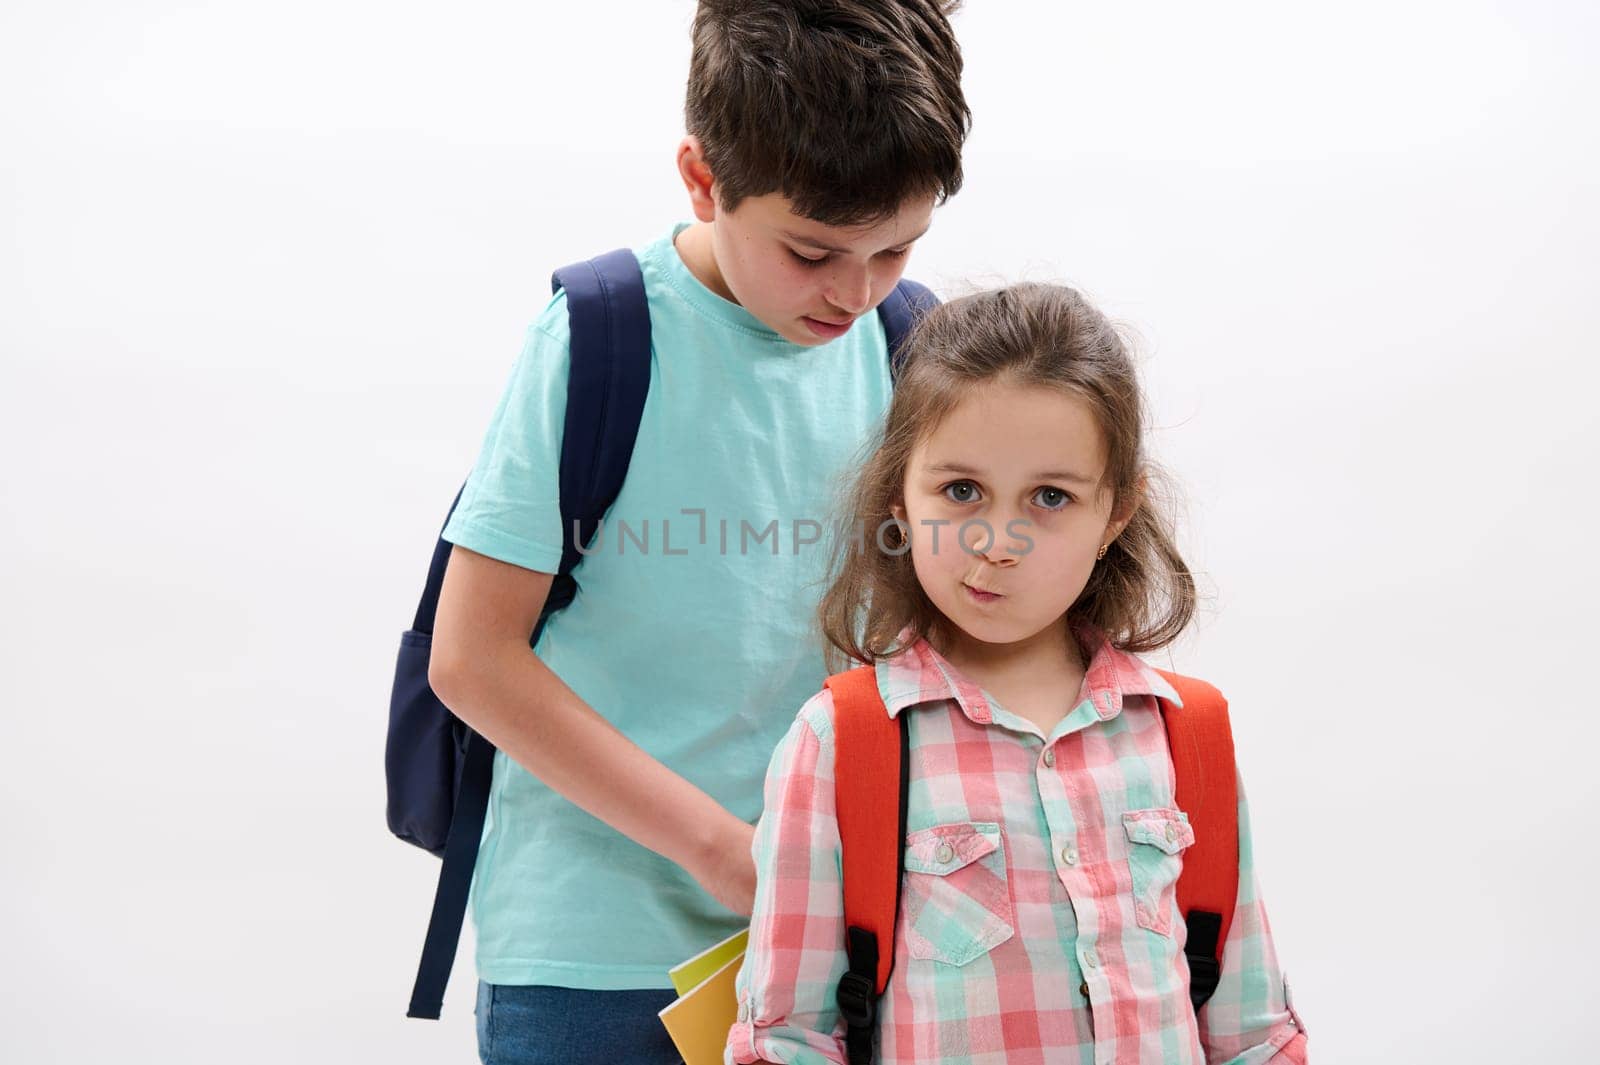 Mischievous kid girl makes faces at camera while her brother puts workbooks inside her backpack over white background by artgf